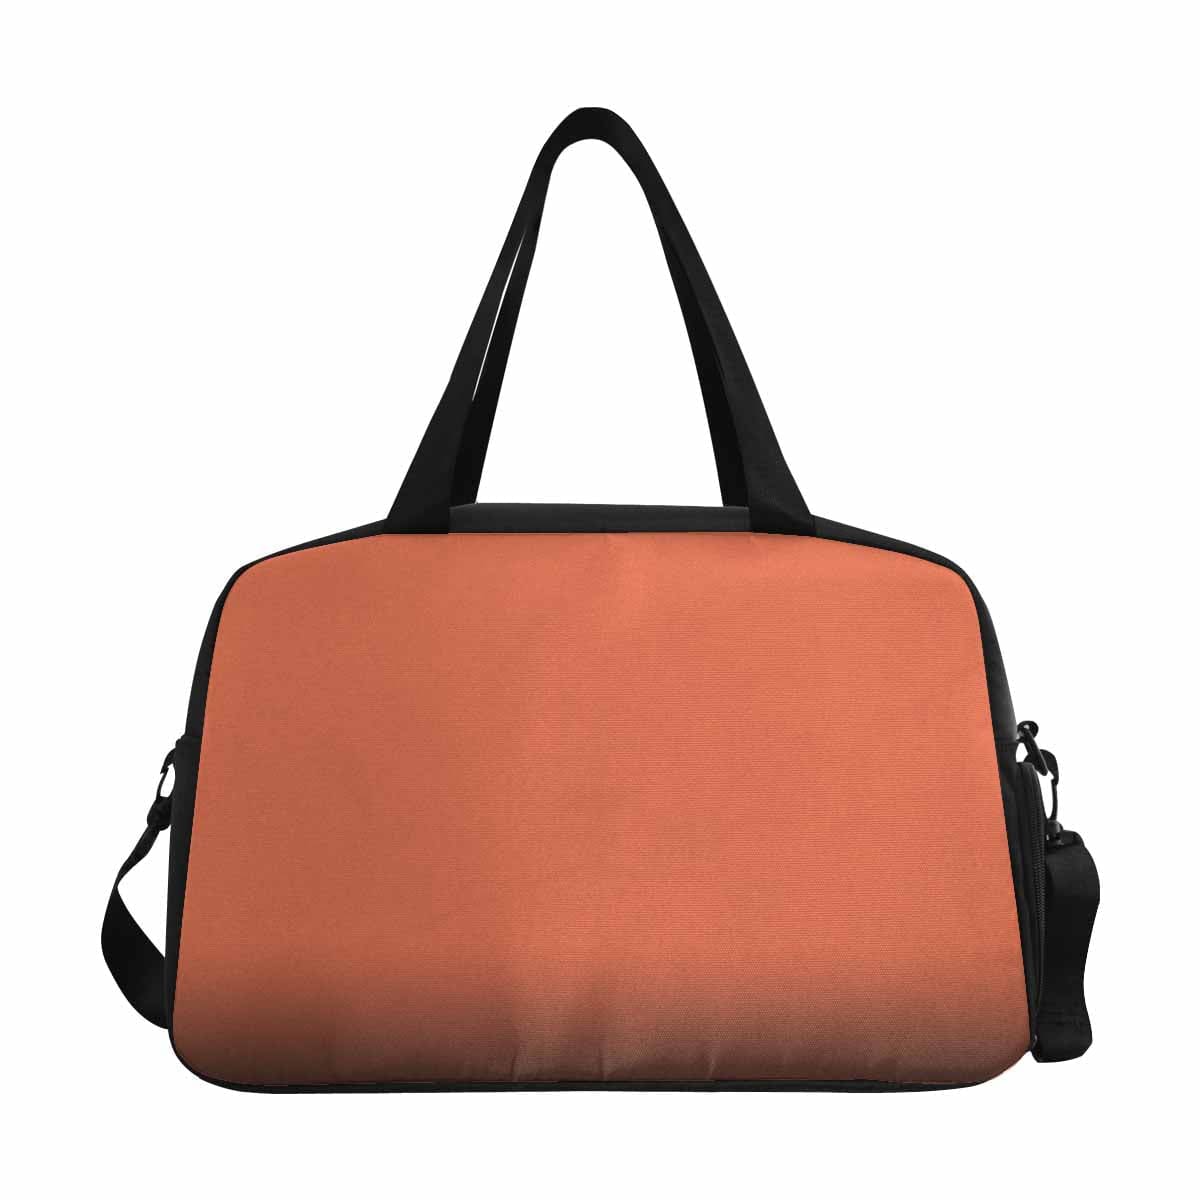 Burnt Sienna Red Tote And Crossbody Travel Bag - Bags | Travel Bags | Crossbody